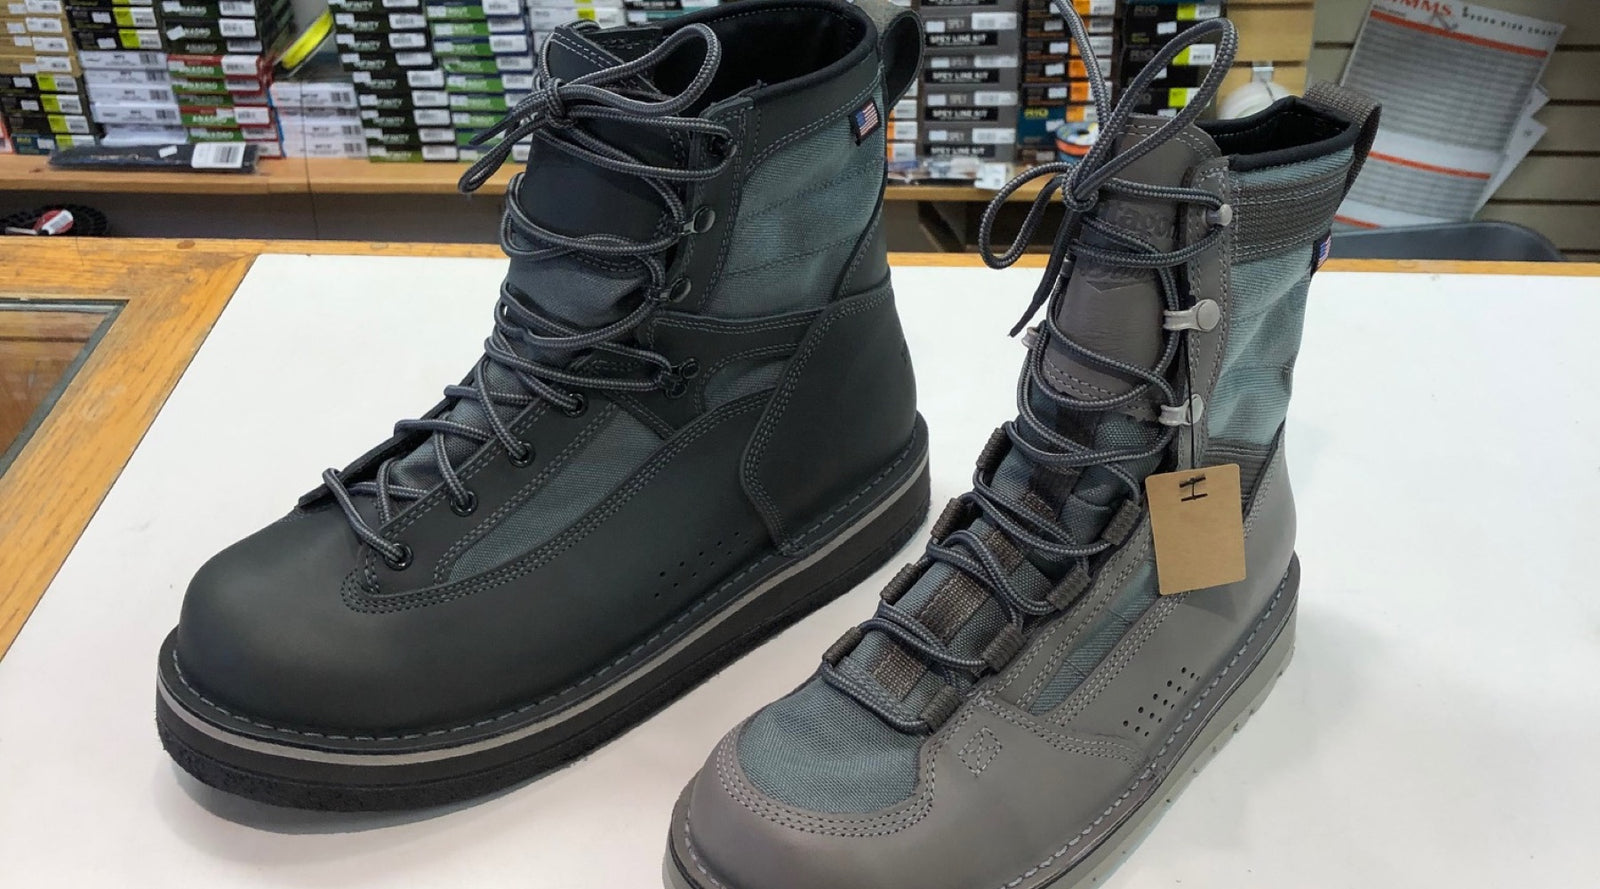 Gear Review: The Patagonia Danner Wading Boot   The Compleat Angler